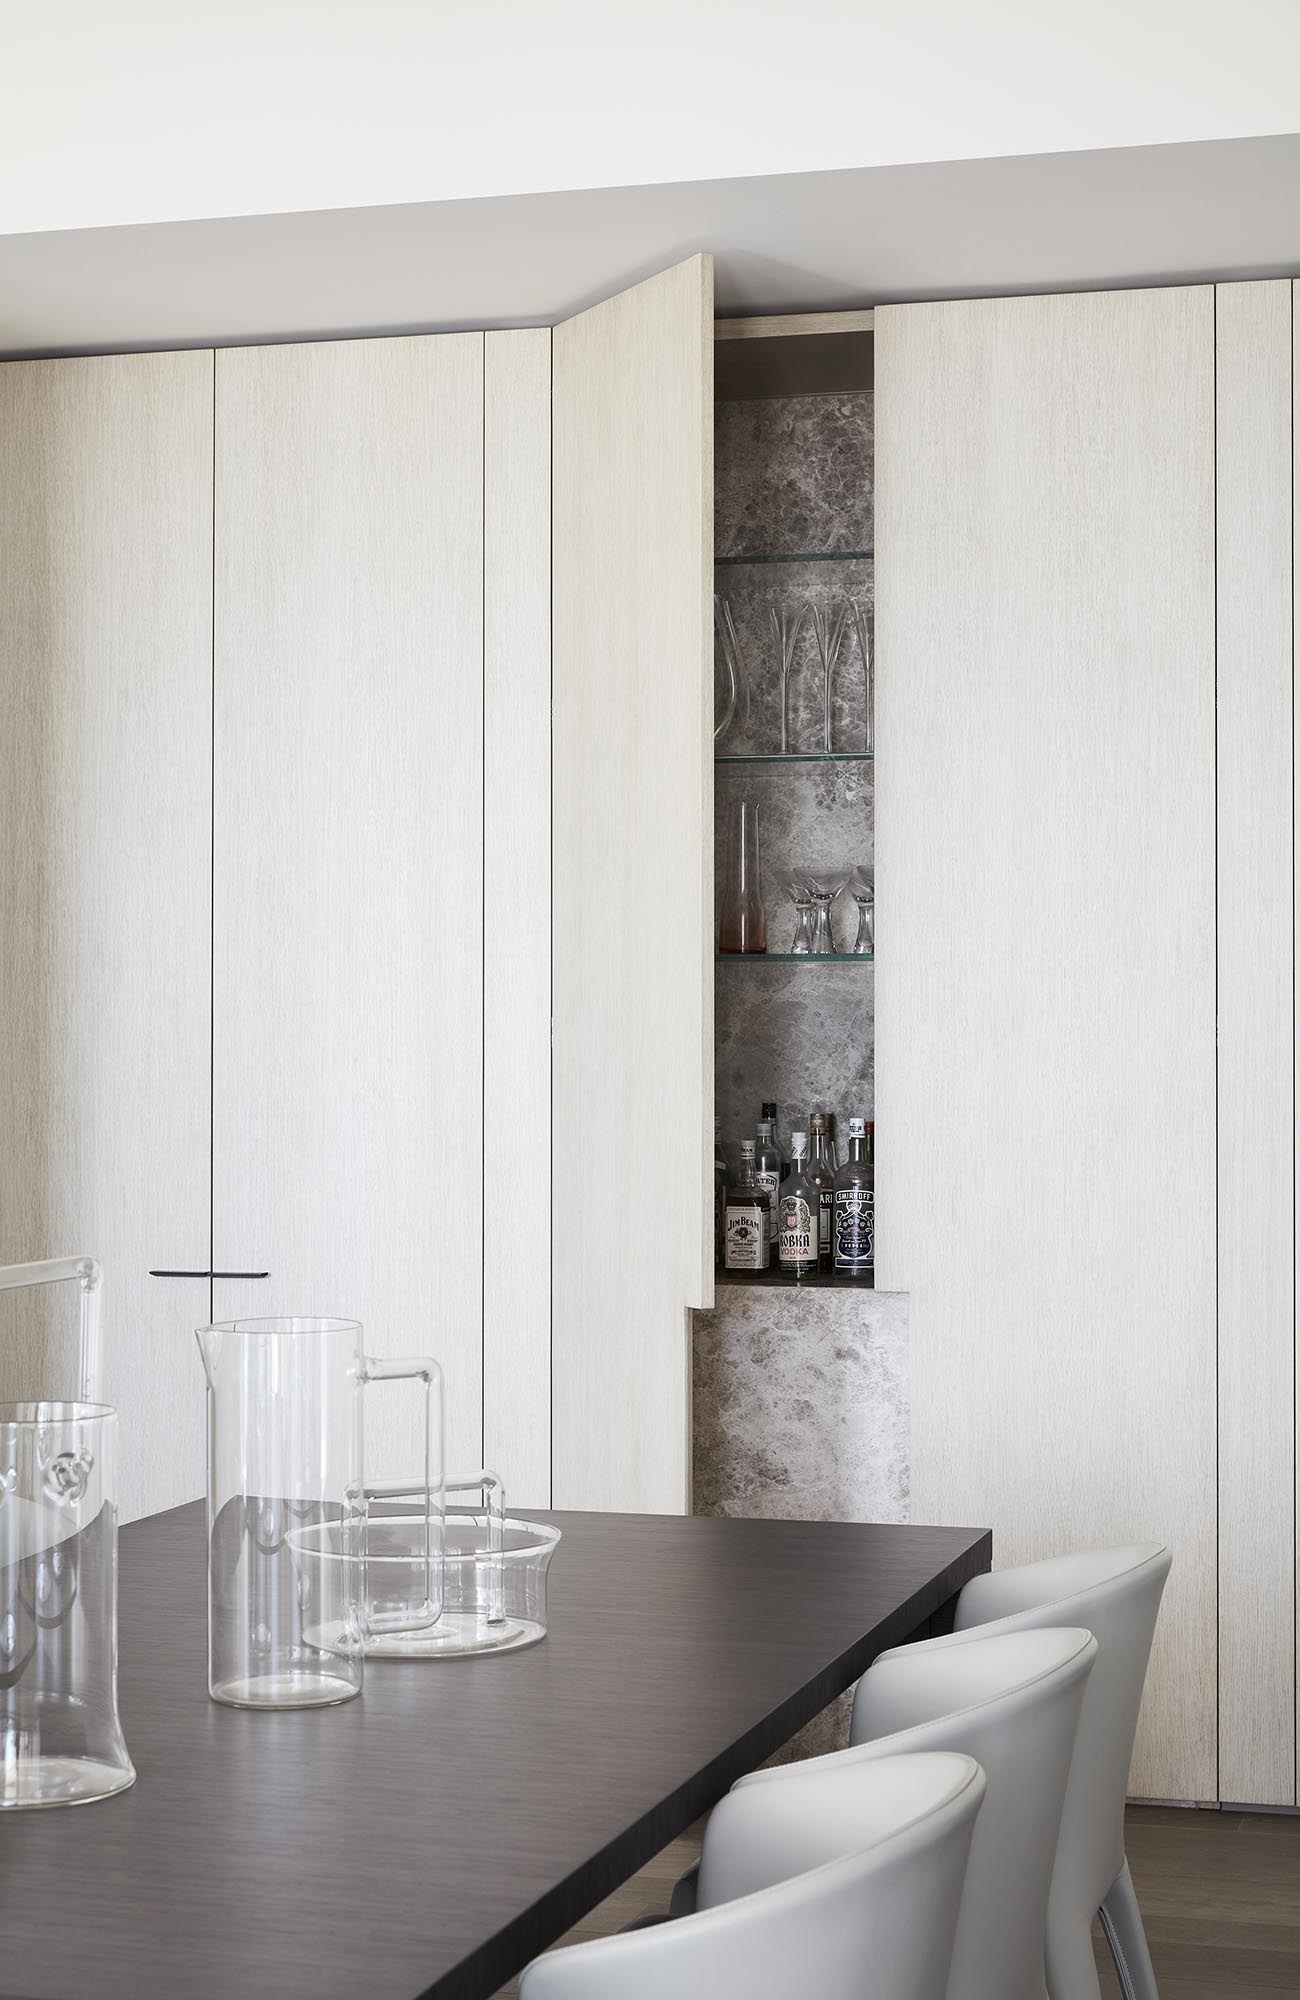 A bar hidden within a minimalist cabinet in the dining room.